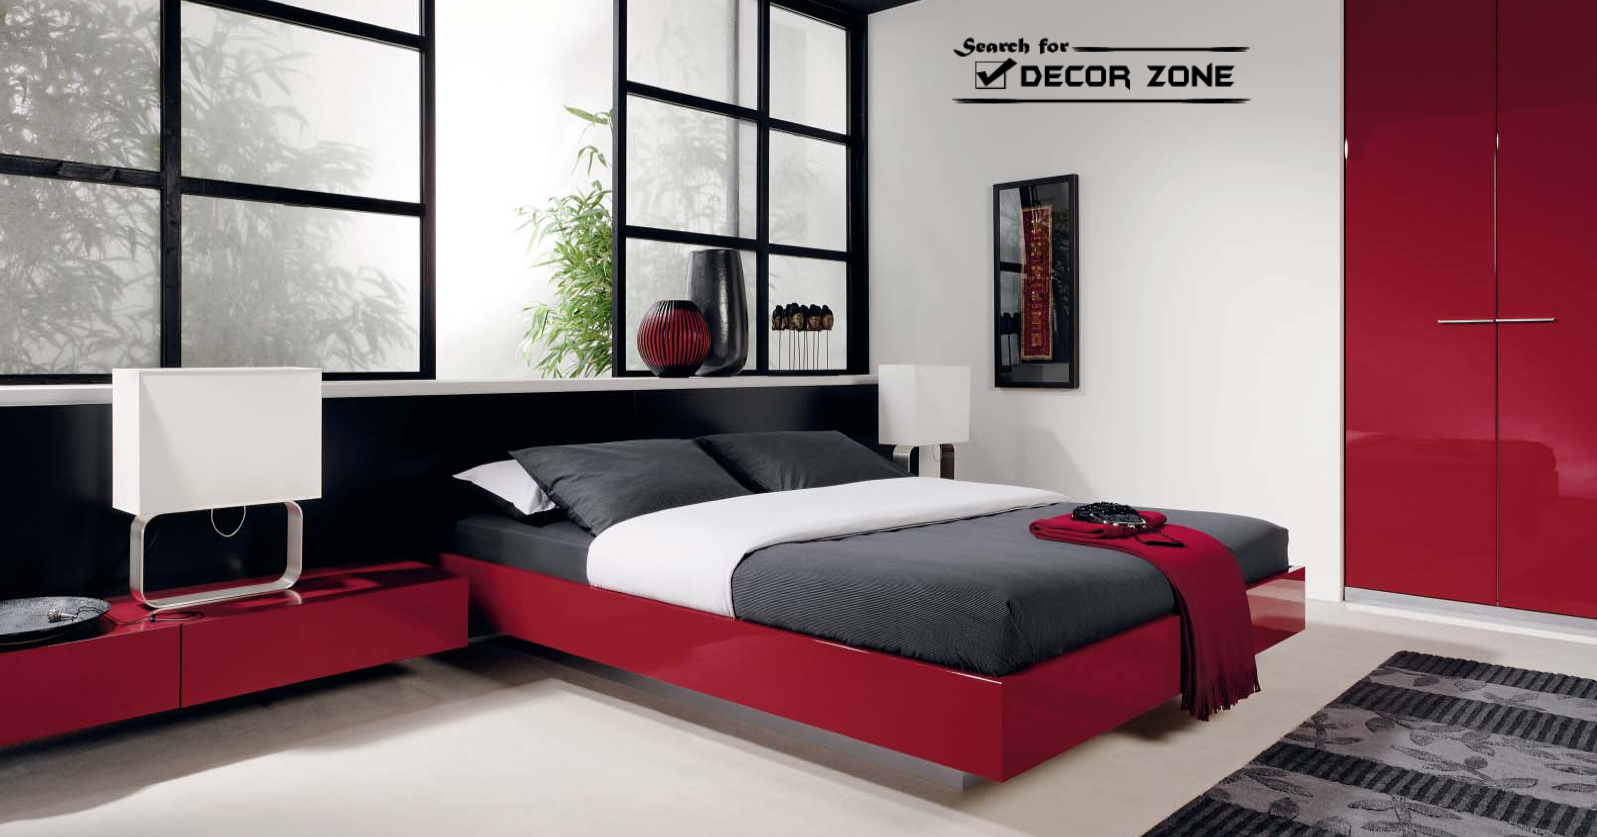 red bedroom furniture ideas photo - 7